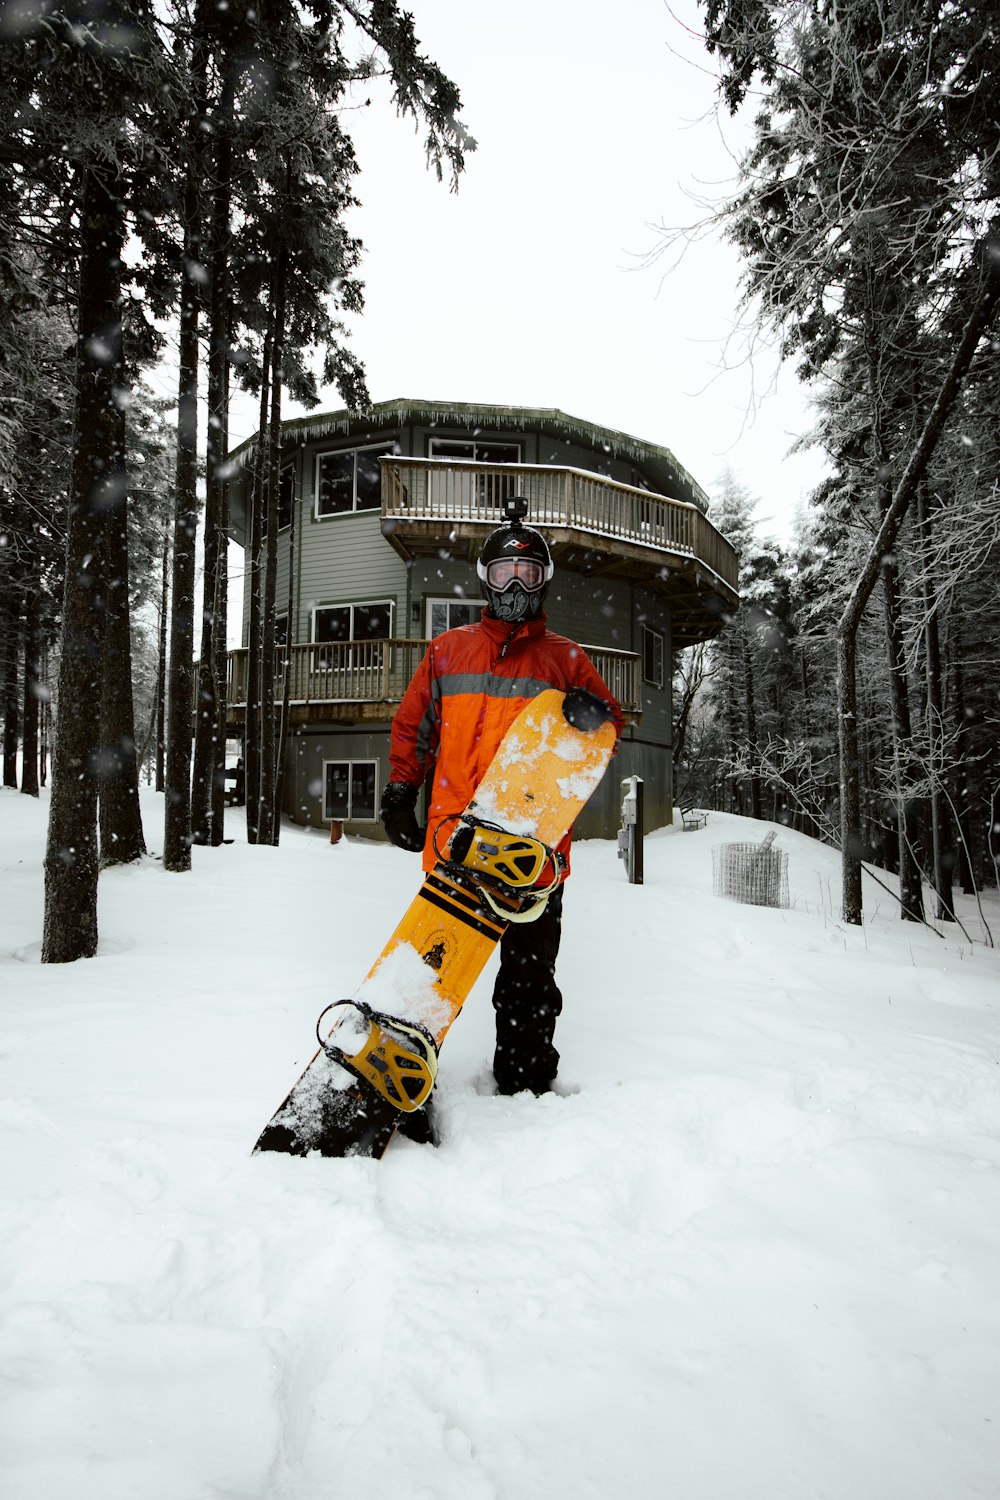 man in orange jacket and black pants riding on yellow snowboard on snow covered ground during